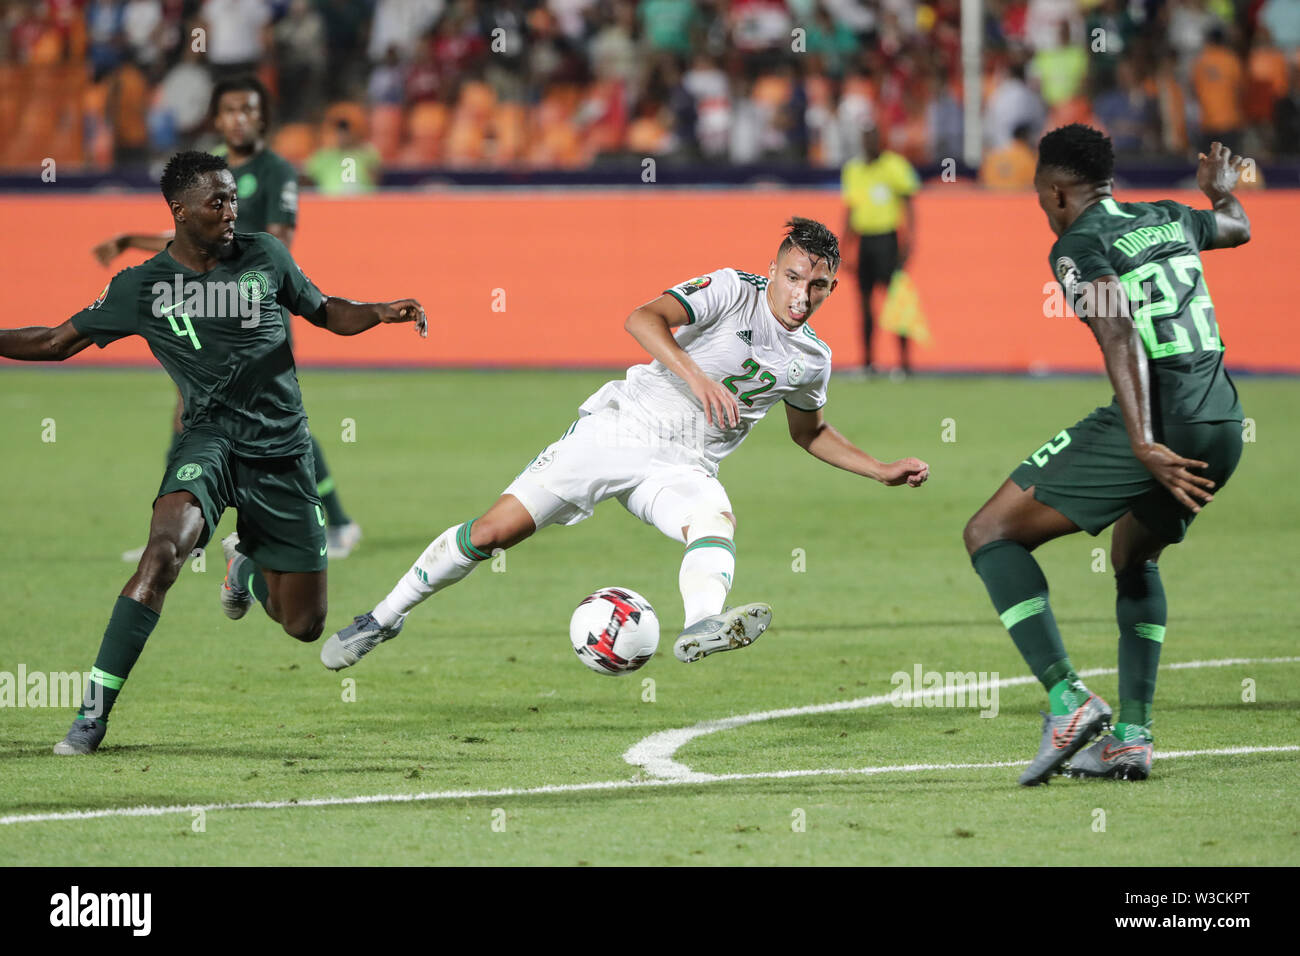 Cairo, Egypt. 14th July, 2019. Algeria's Ismael Bennacer (C) battles for the ball with Nigeria's Wilfred Ndidi (L) and Kenneth Omeruo during the 2019 Africa Cup of Nations semi-final soccer match between Algeria and Nigeria at the Cairo International Stadium. Credit: Oliver Weiken/dpa/Alamy Live News Stock Photo